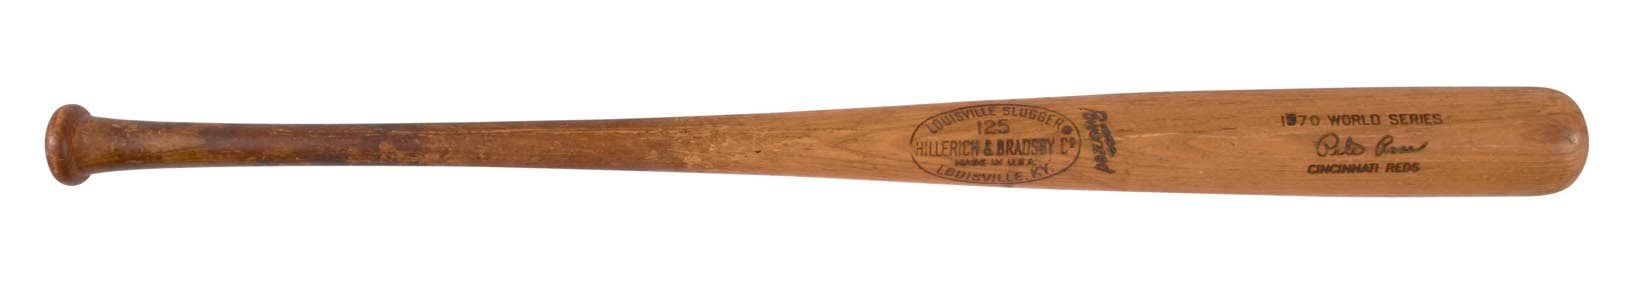 - 1970 Pete Rose World Series Game 4 Game Used Bat - HR Game (Photo-Matched)